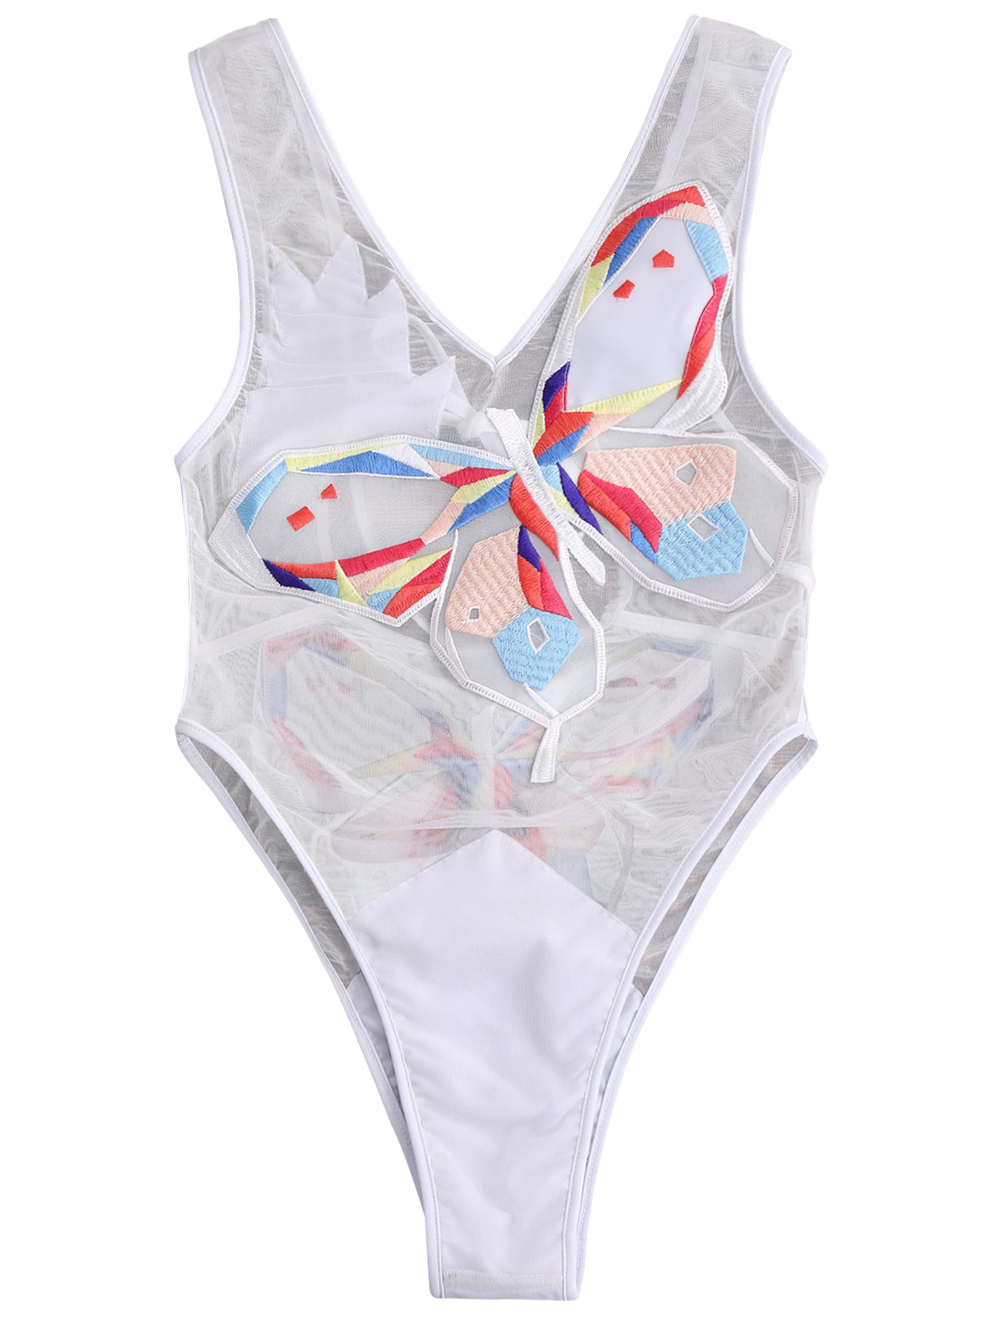 Embroidered Mesh One Piece Lingerie Swimsuit - White S on Luulla